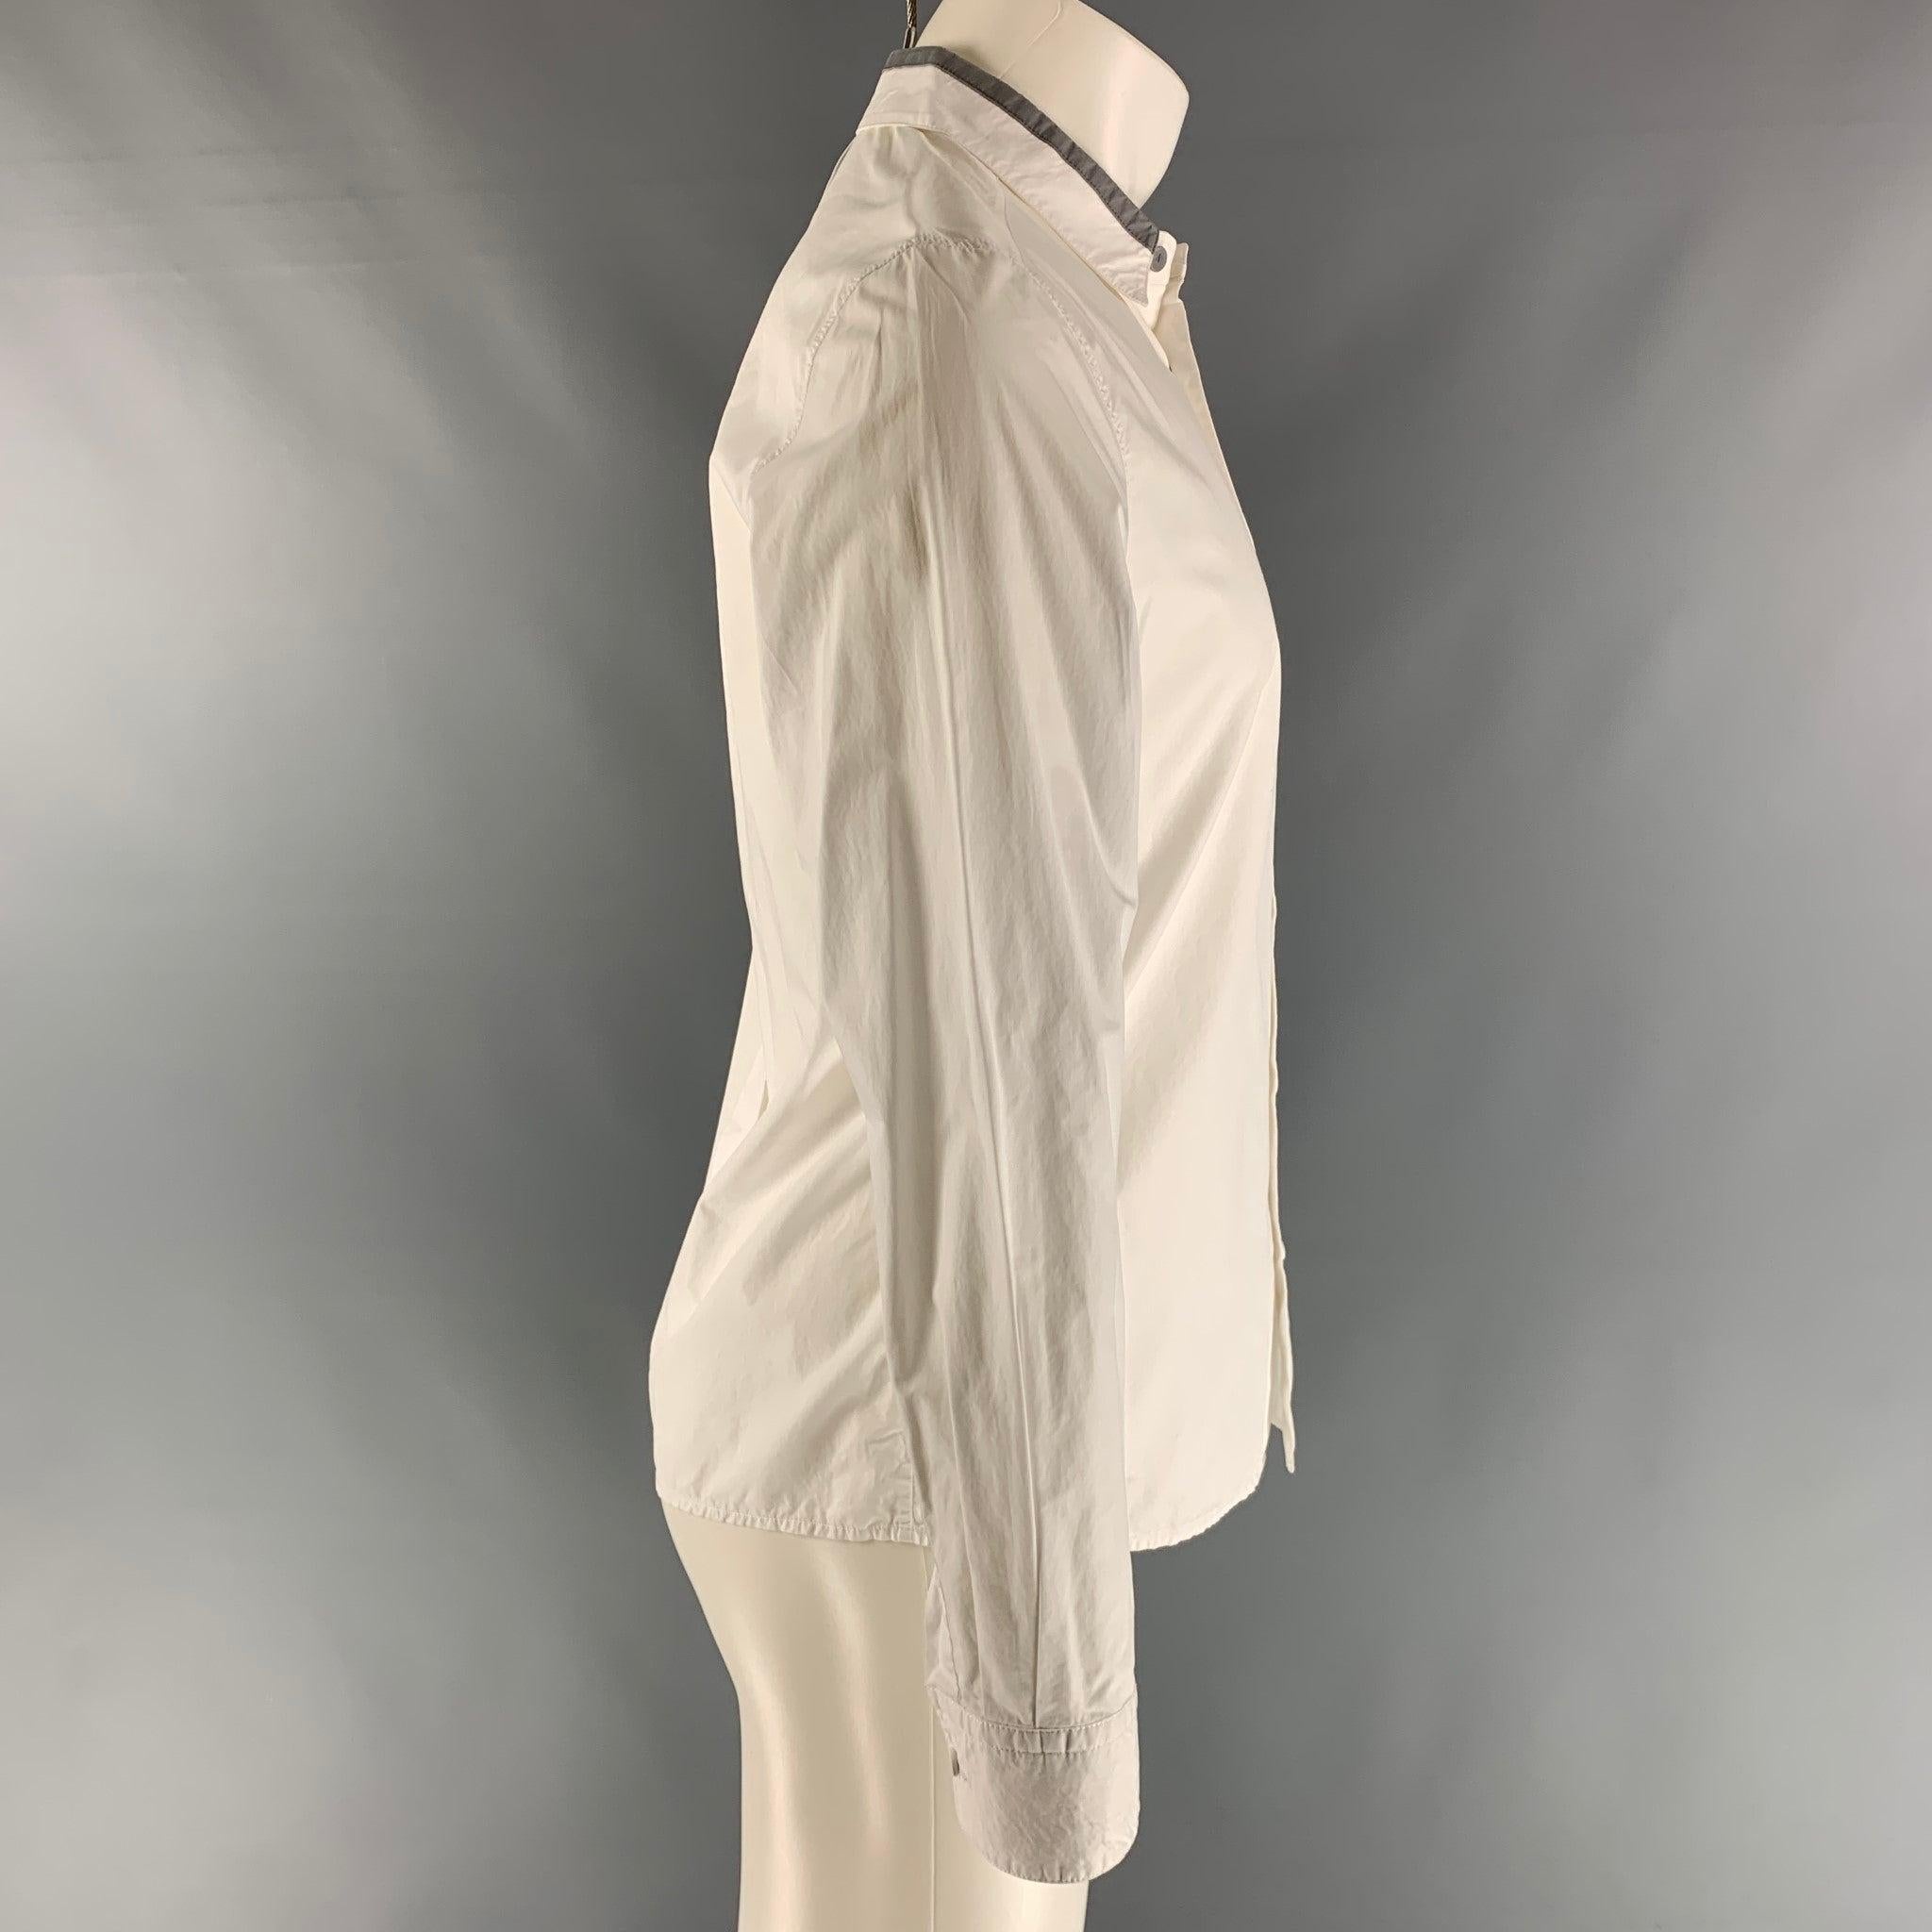 3.1 PHILLIP LIM long sleeve shirt comes in a white cotton featuring a button up closure, one button round cuff, and a straight collar. Excellent Pre-Owned Condition. 
 

 Marked:  S 
 

 Measurements: 
  
 Shoulder: 18 inches Chest: 42 inches